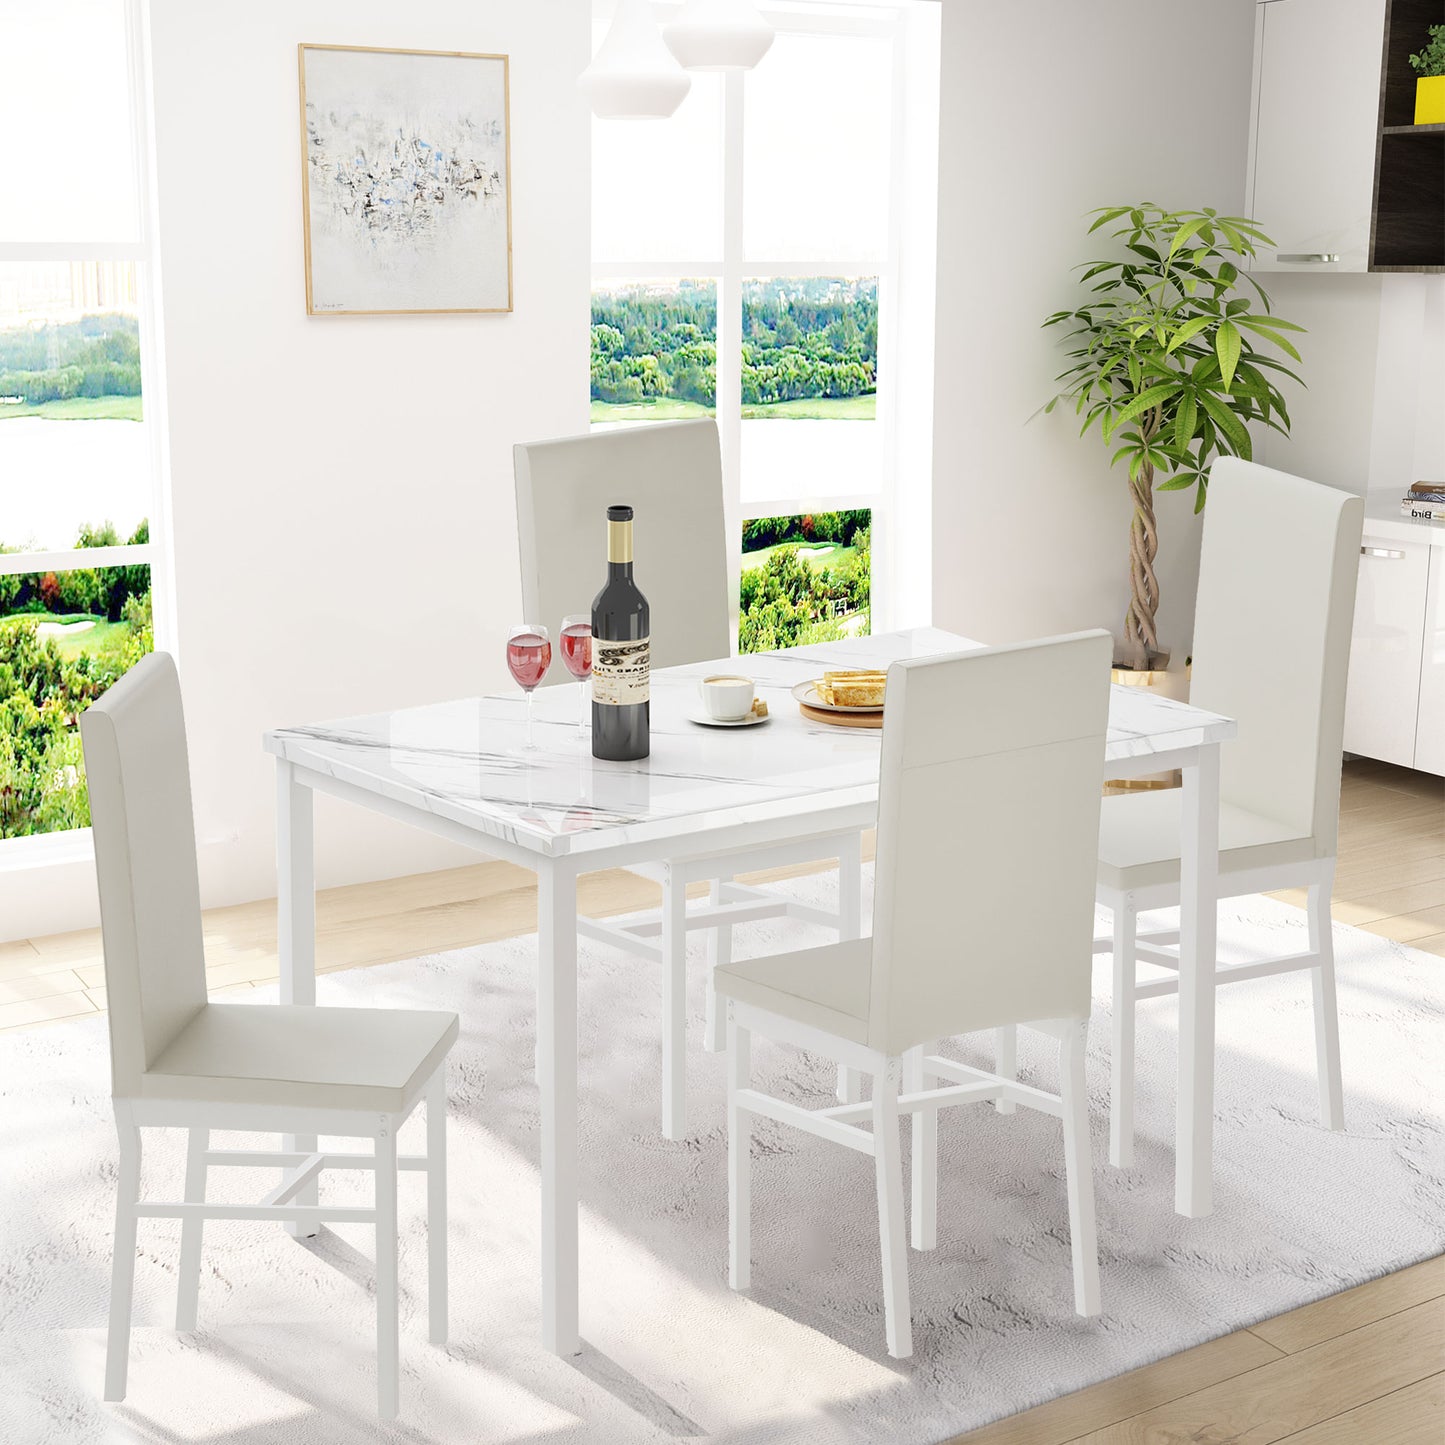 5 Piece Dining Set, Modern Dining Table and Chairs Set for 4, Kitchen Dining Table Set with Faux Marble Tabletop and 4 PU Leather Upholstered Chairs, for Small Space, Breakfast Nook, White, D8531